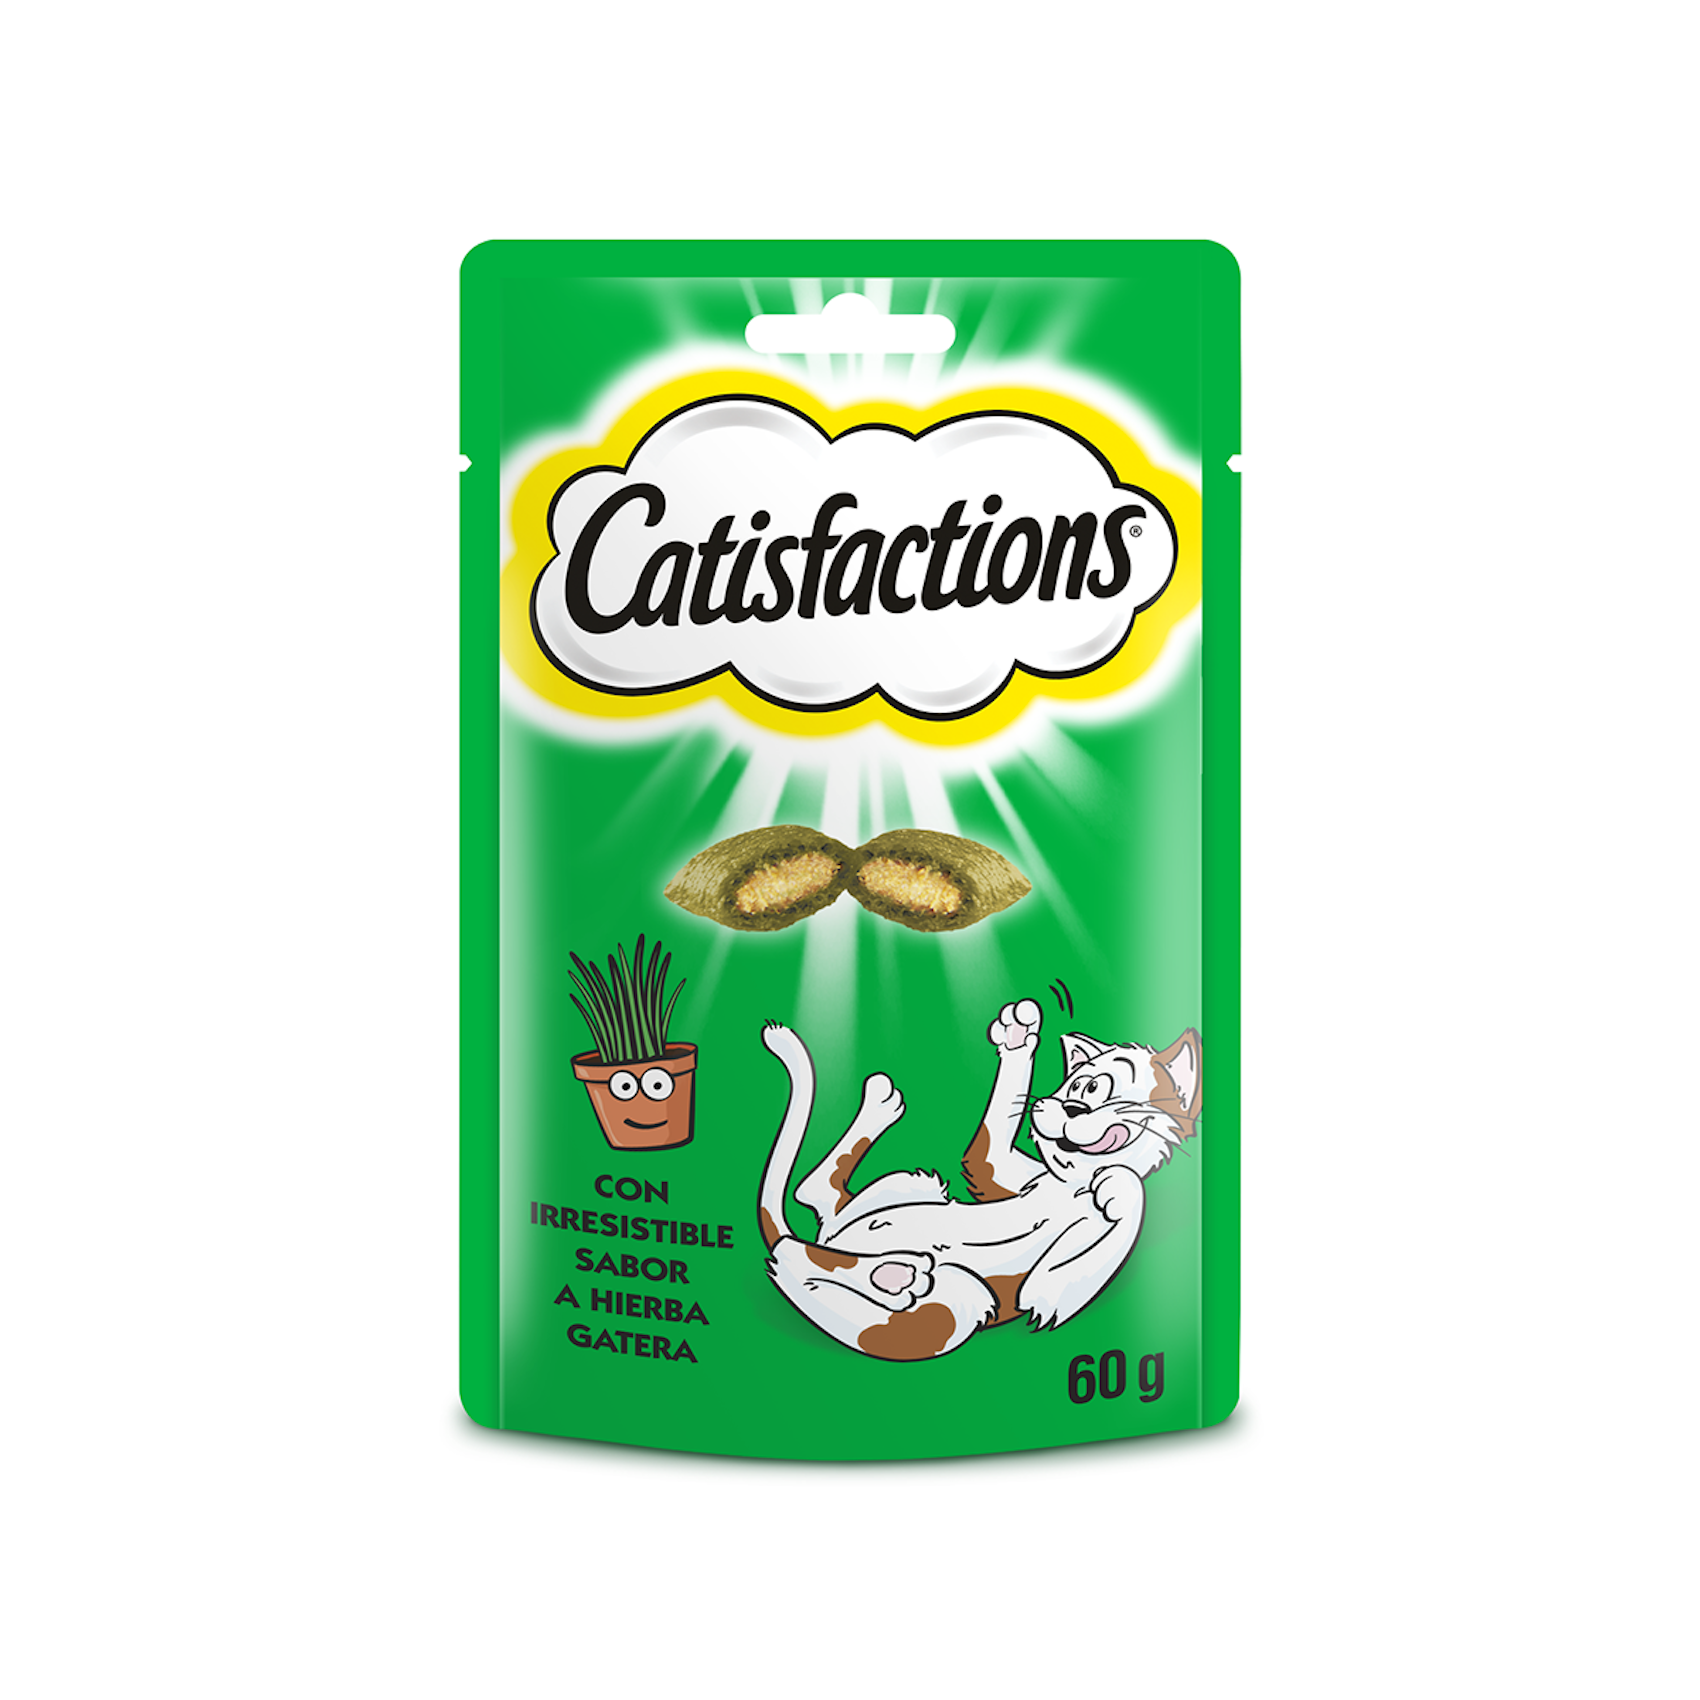 Catisfactions Hierbagatera 60G